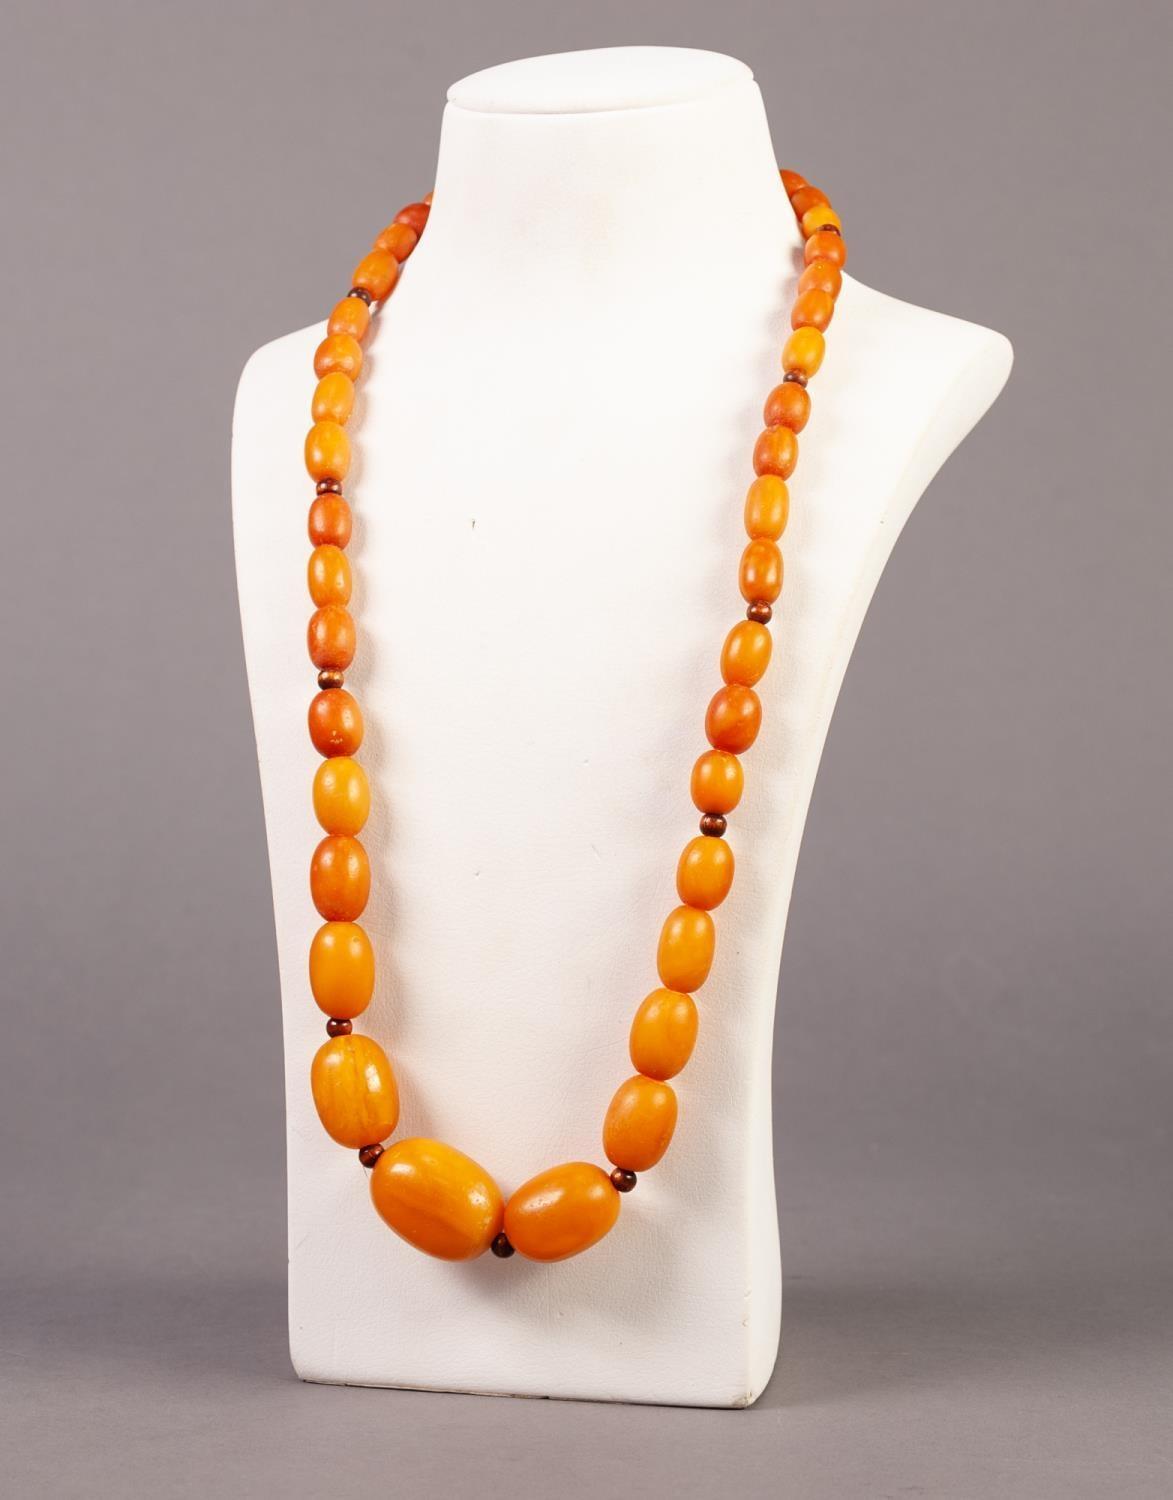 SINGLE STRAND NECKLACE OF BUTTERSCOTCH AMBER GRADUATED OVAL BEADS, with screw clasp, 25" (63.5cm) - Image 2 of 4